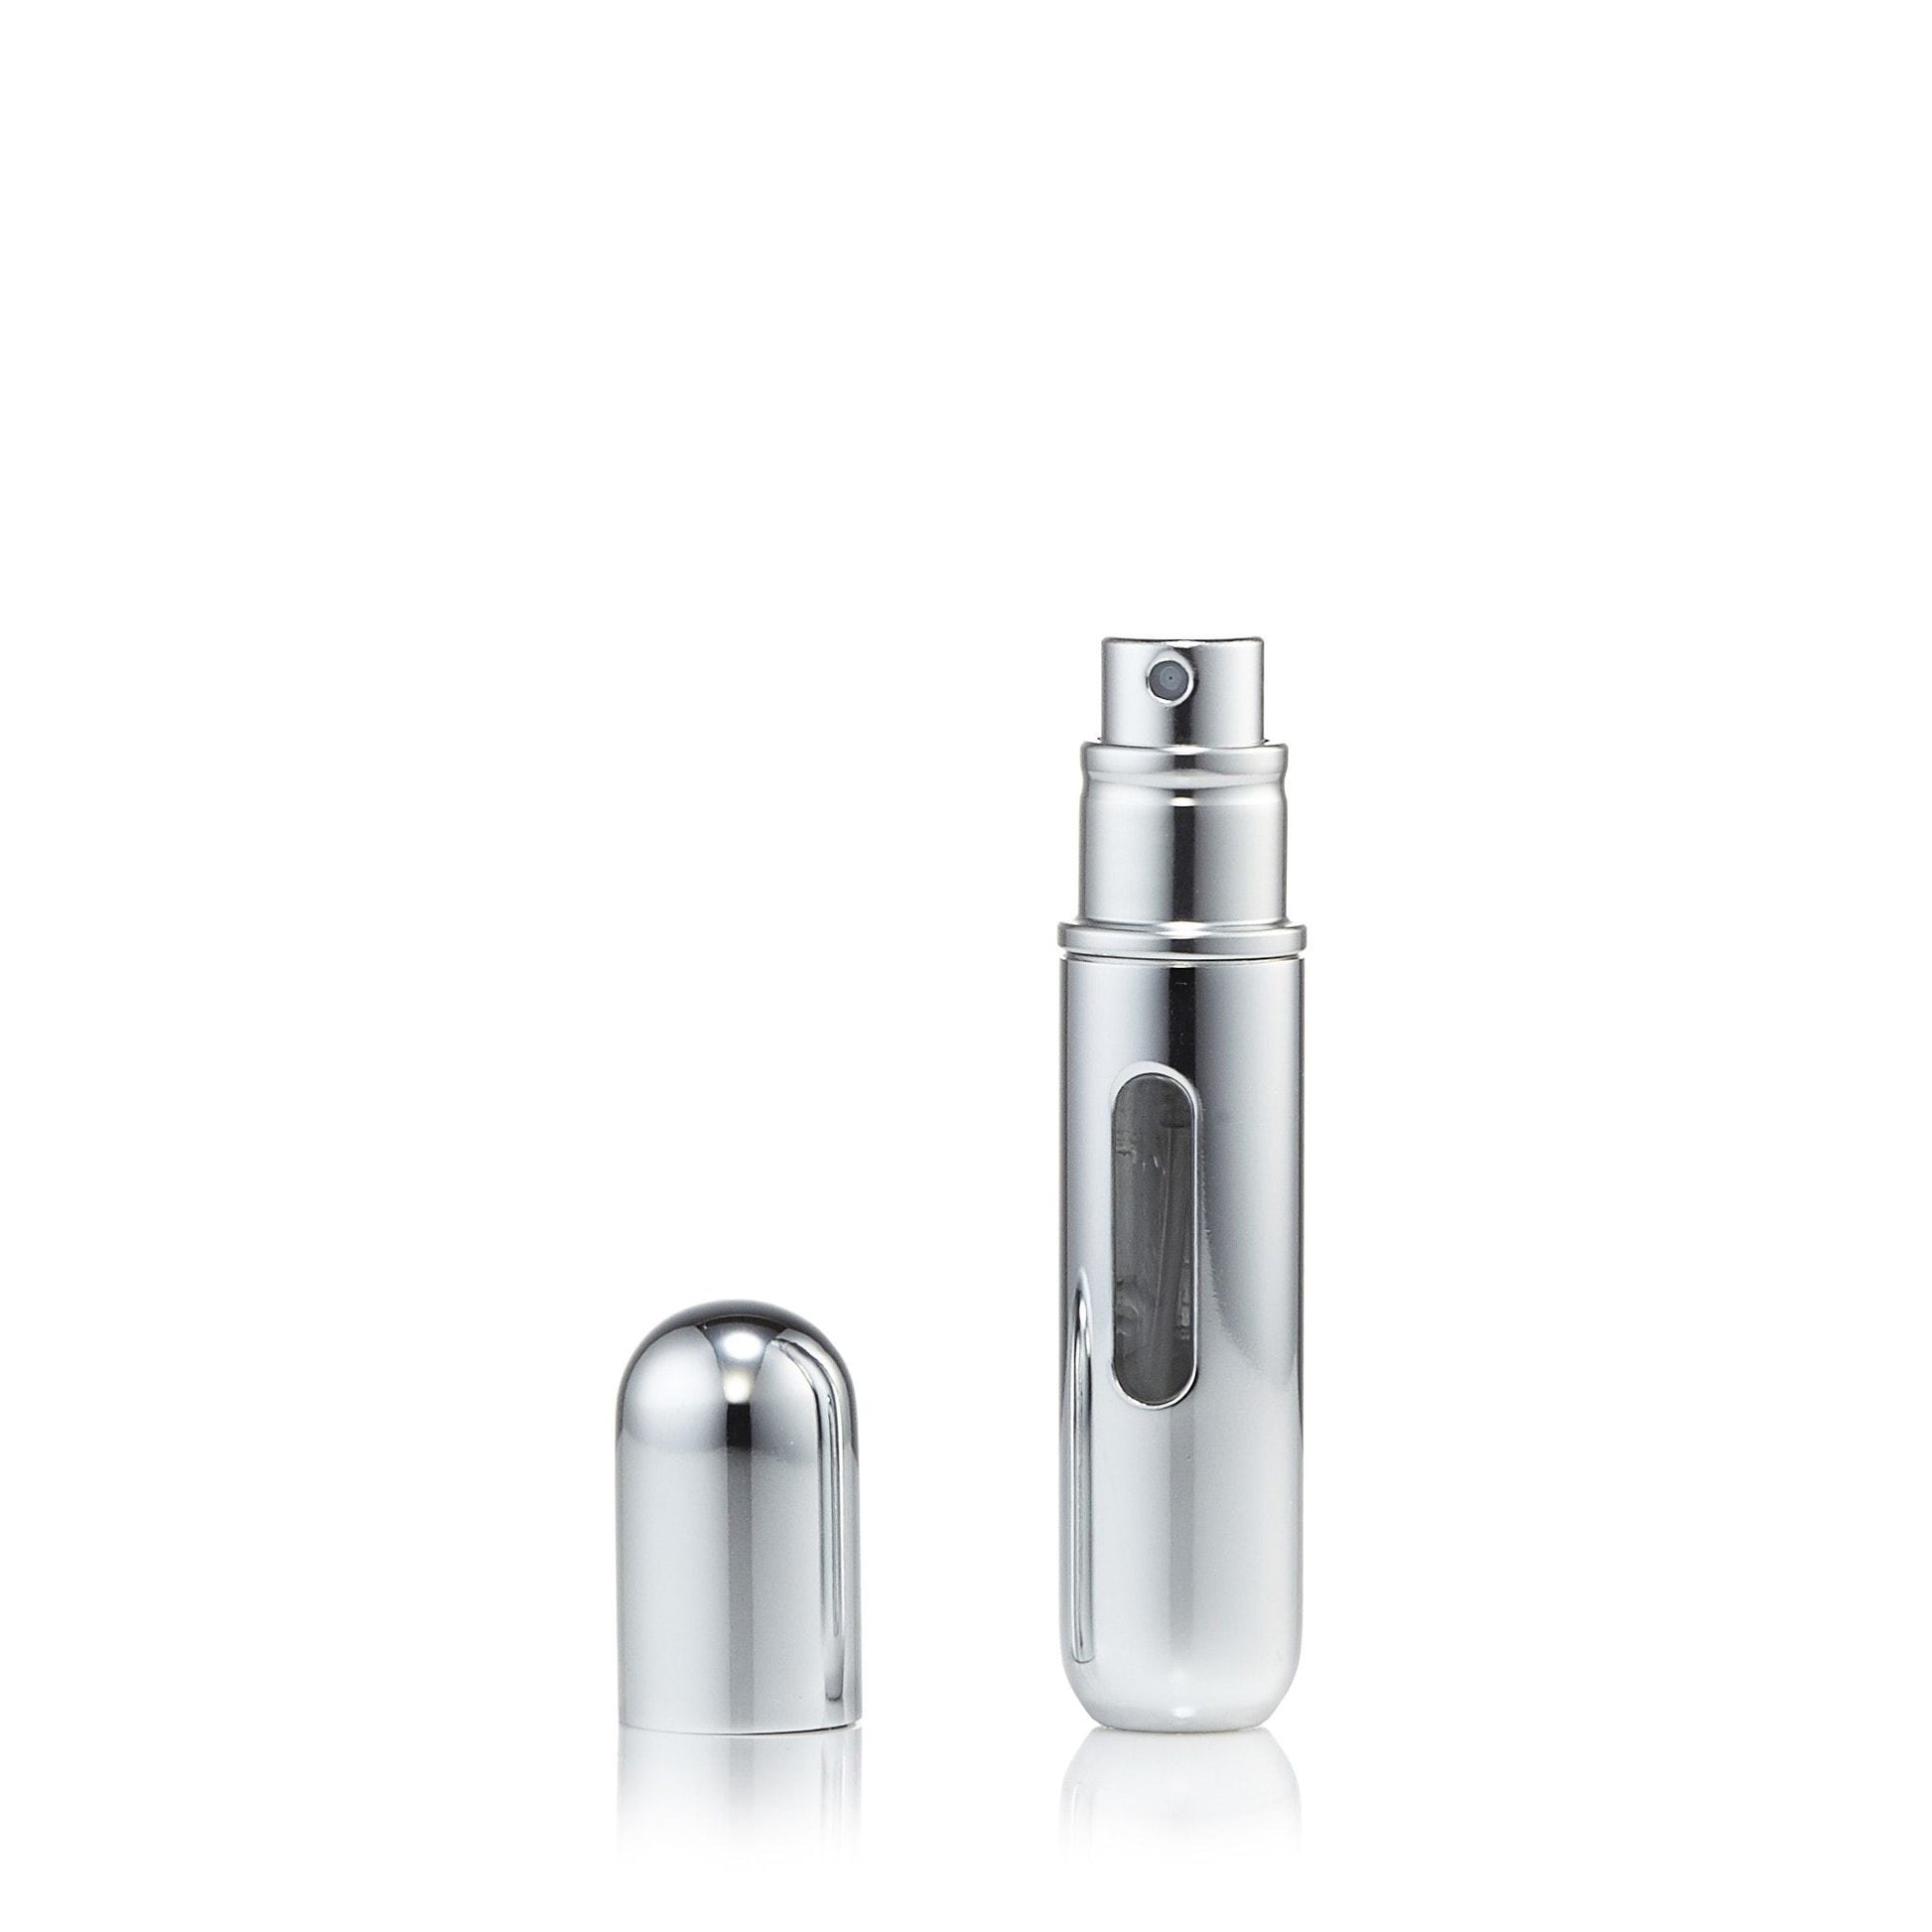 Pump and Fill Fragrance Fragrance Atomizer by Outlet – Flo